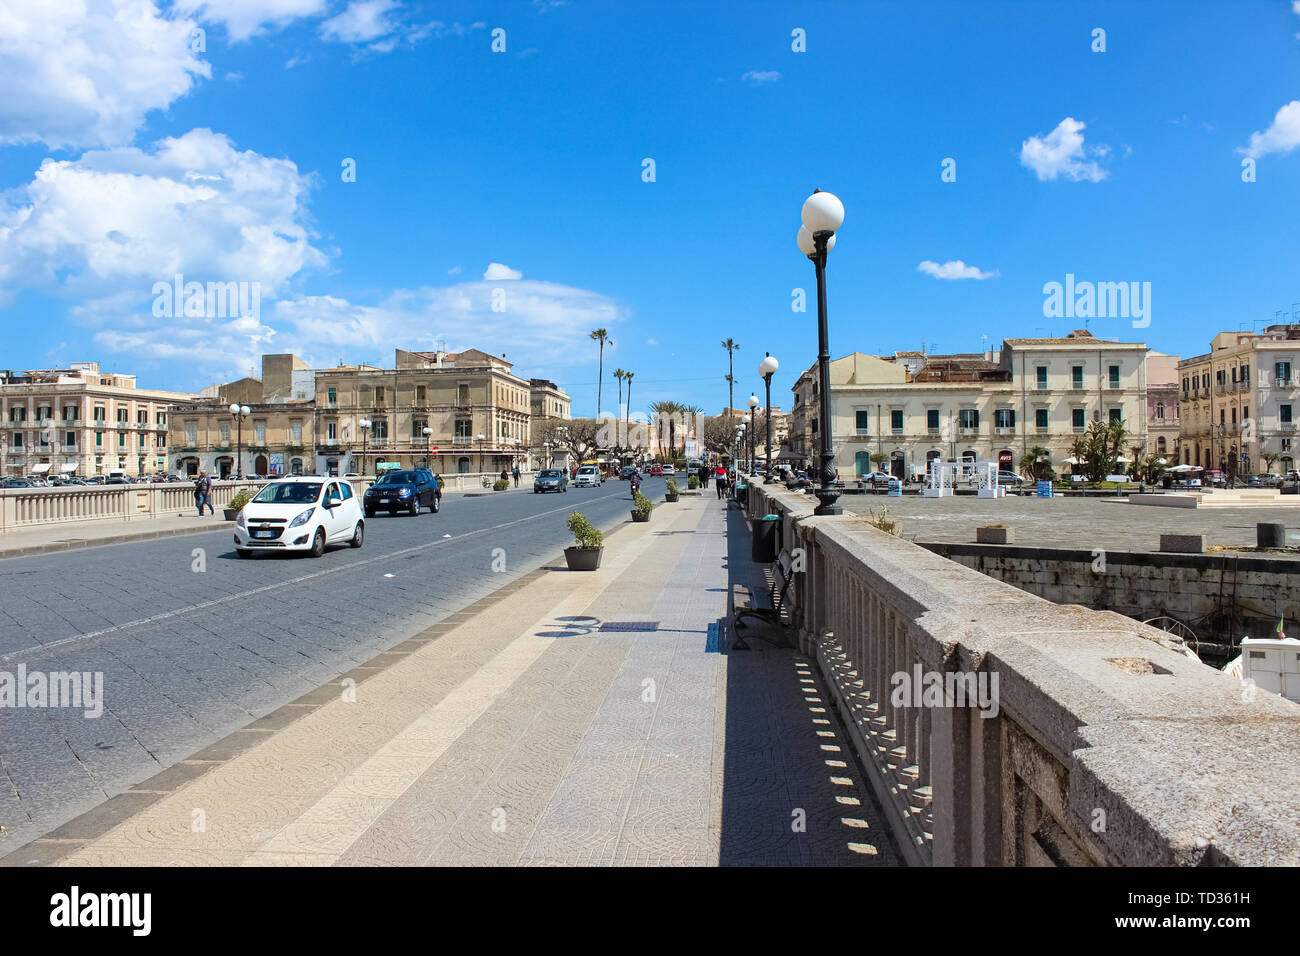 Syracuse, Sicily, Italy - Apr 10th 2019: Bridge connecting Syracuse city and famous Ortygia Island photographed on a sunny day with driving car. Beautiful Ortigia is a popular tourist spot. Stock Photo